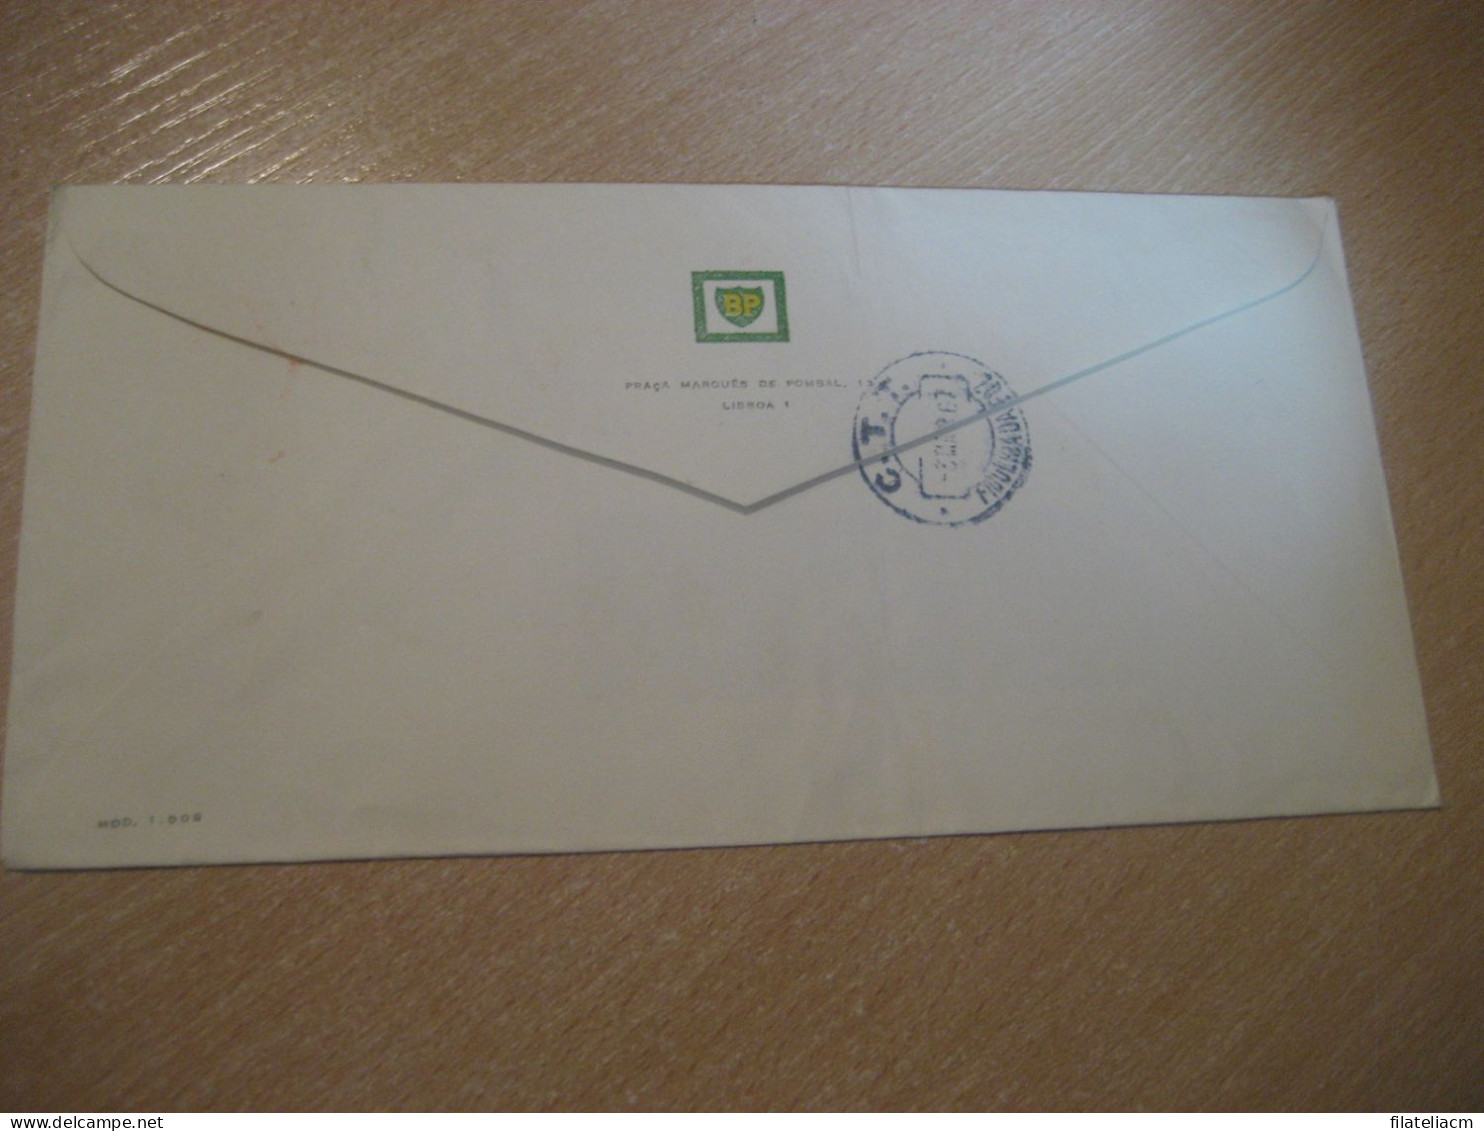 LISBOA 1967 BP Gas Oil Registered Meter Mail Cancel Cover PORTUGAL - Lettres & Documents